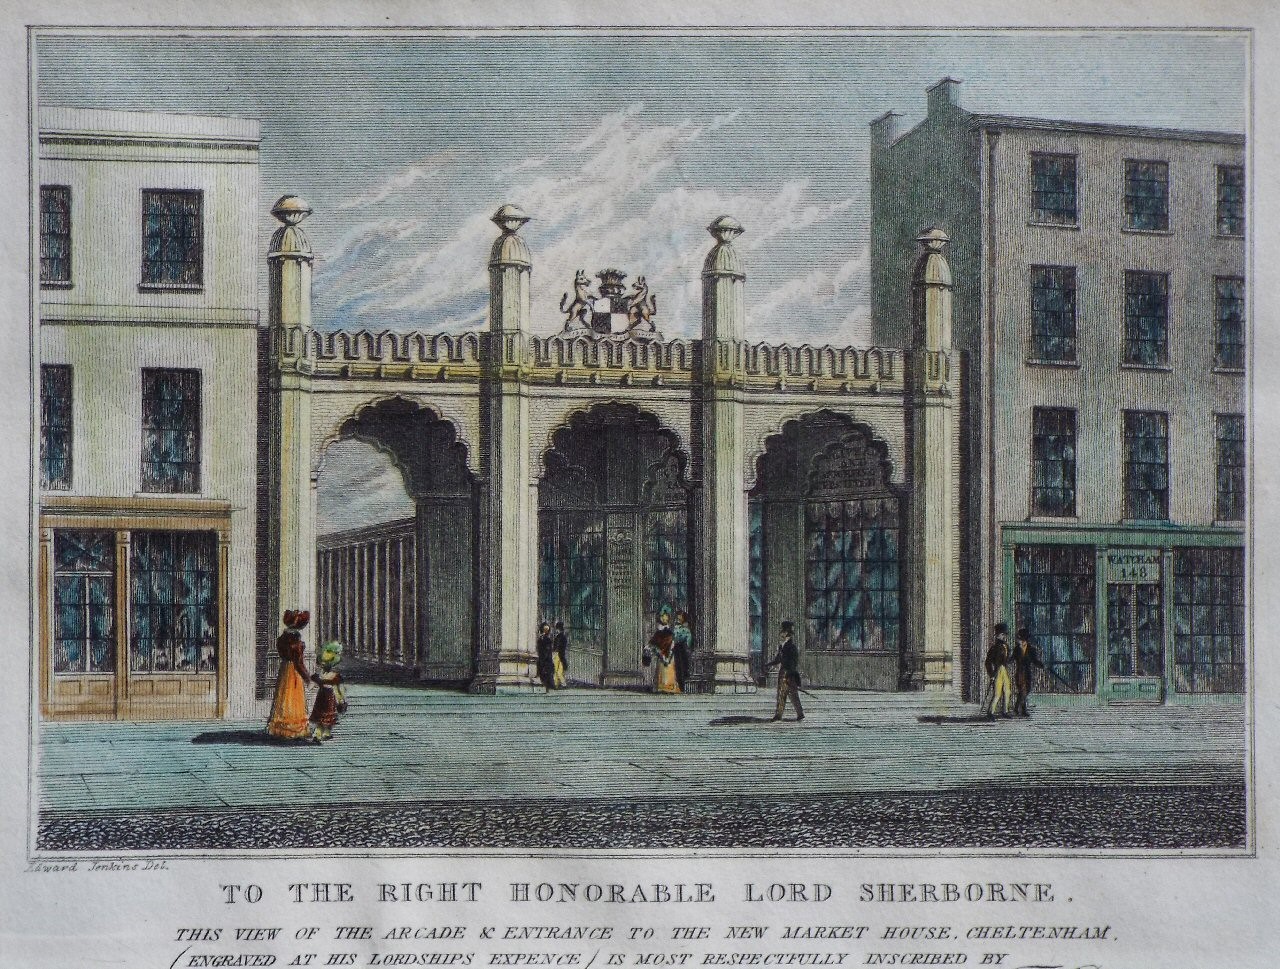 Print - To the Right Honorable Lord Sherborne, this view of the Arcade & Entrance to the New Market House, Cheltenham, (engraved at his Lordships expence) is most Respectfully Inscribed by The Publishers.